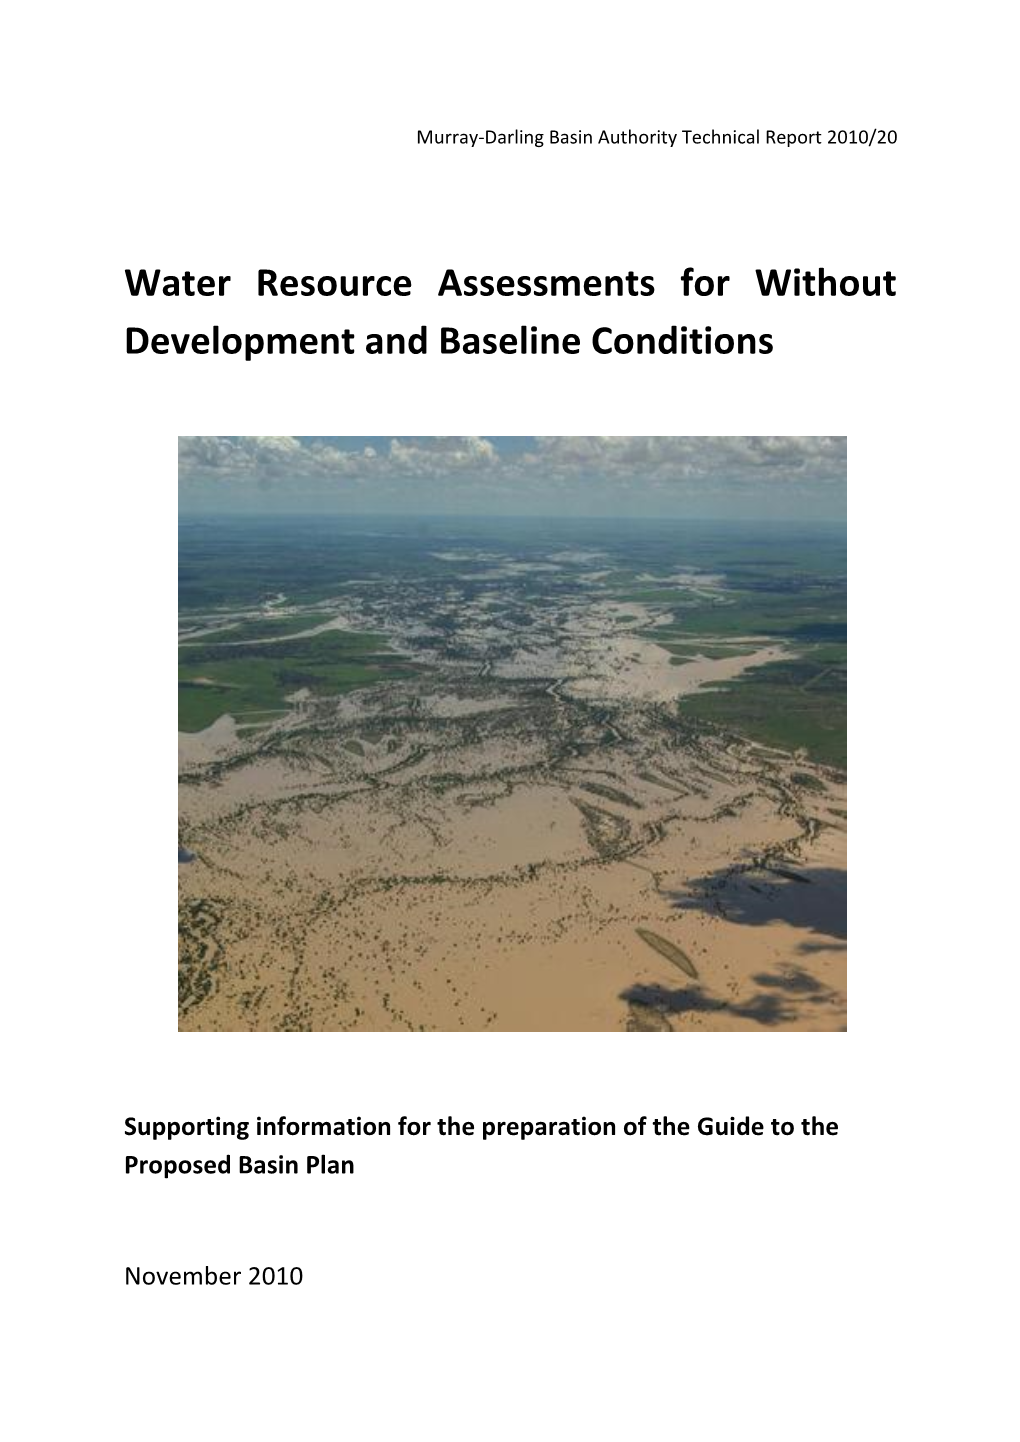 Water Resource Assessments for Without Development and Baseline Conditions